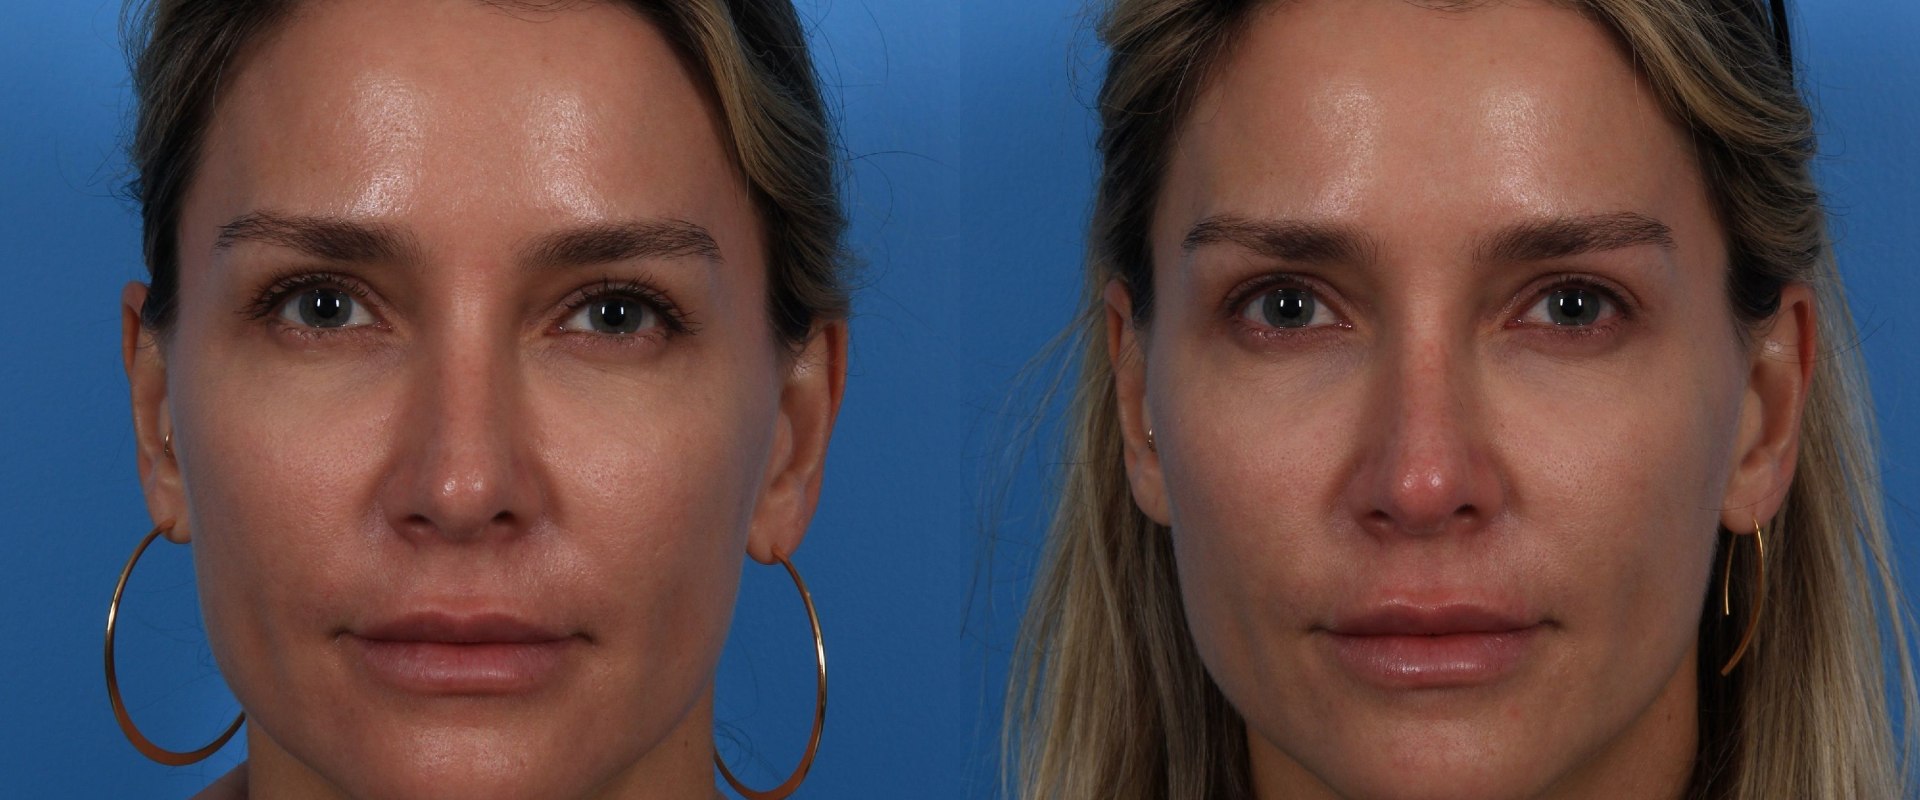 Do Thread Lifts Last Longer Than Fillers?